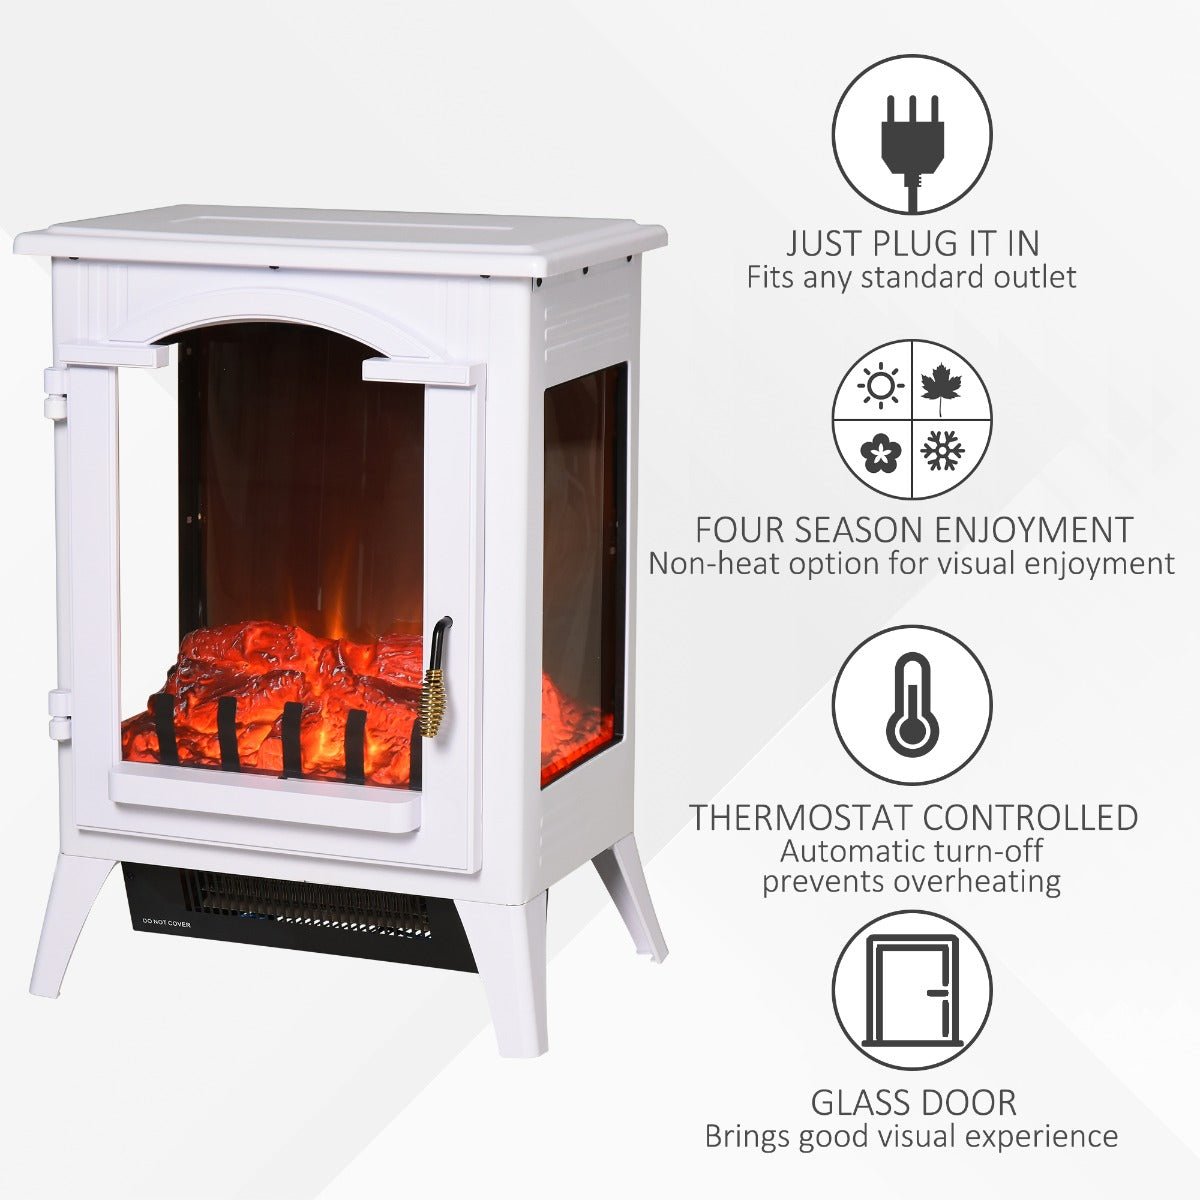 Miscellaneous-23" Electric Freestanding Fireplace, Fireplace Stove with Realistic LED Flames and Logs and Overheating Protection, 750W/1500W, White - Outdoor Style Company